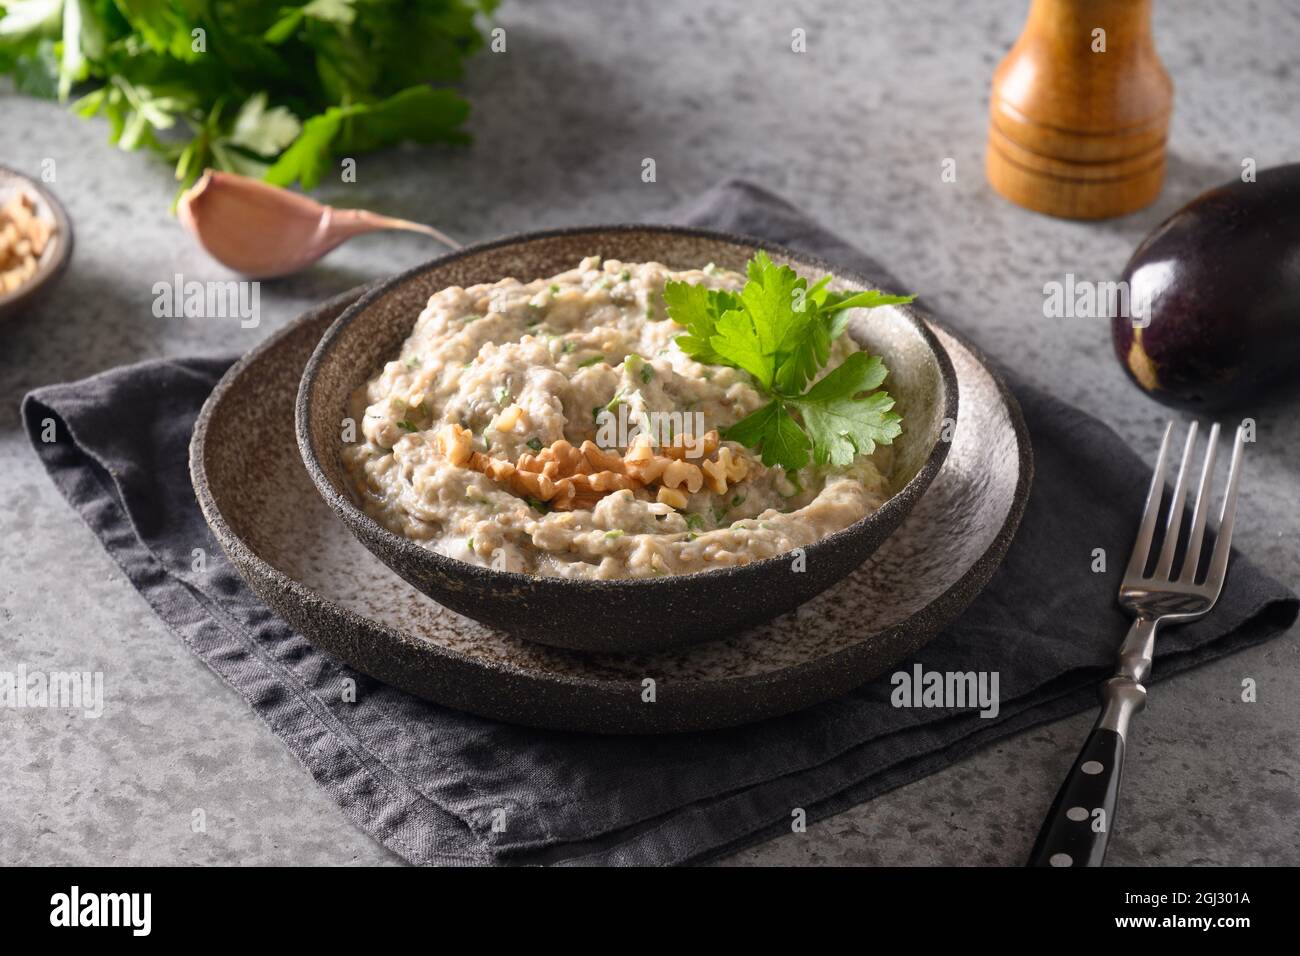 Baba ganoush Levantine cuisine appetizer made from baked eggplant with parsley, garlic and olive oil. Close up. Stock Photo